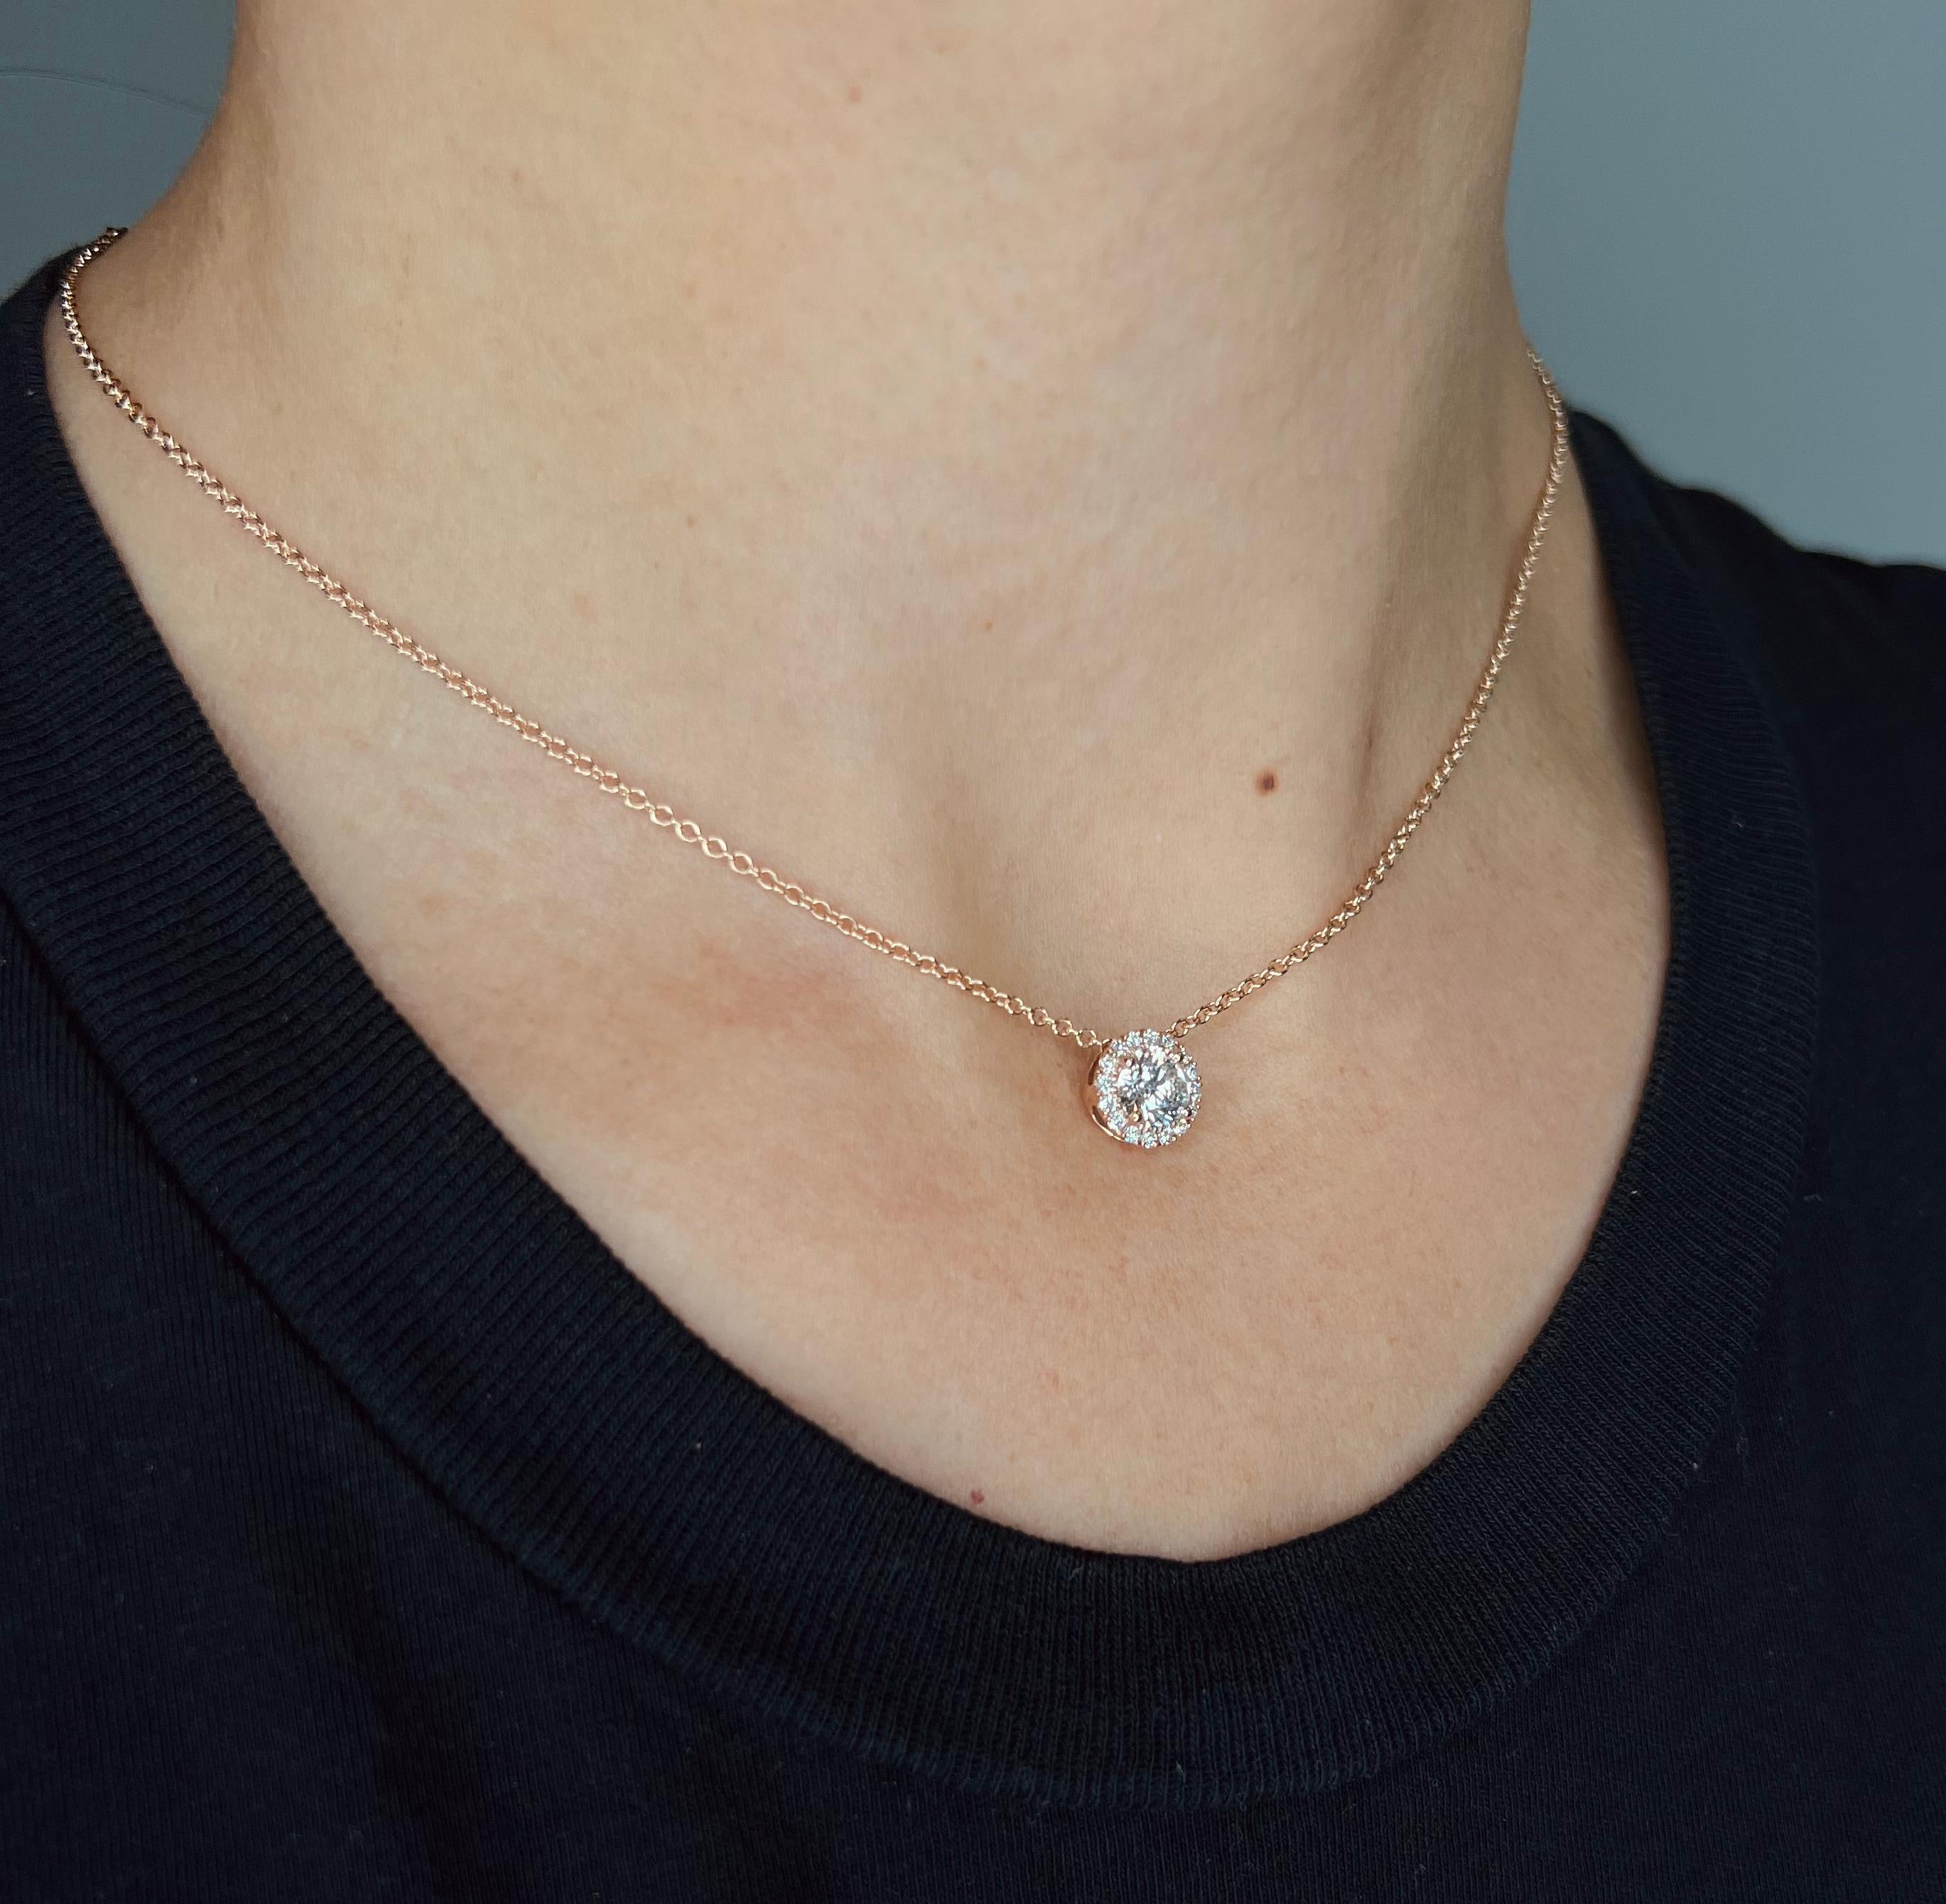 This diamond circle pendant provides a glowing chic look.
Metal: 14k Gold
Diamond Total Carats (Includes 0.15ct halo): 0.65 Total (0.50ct Center)
Diamond Cut: Round Natural Diamonds (Not Lab Grown)
Diamond Clarity: VS
Diamond Color: F
Color: Rose